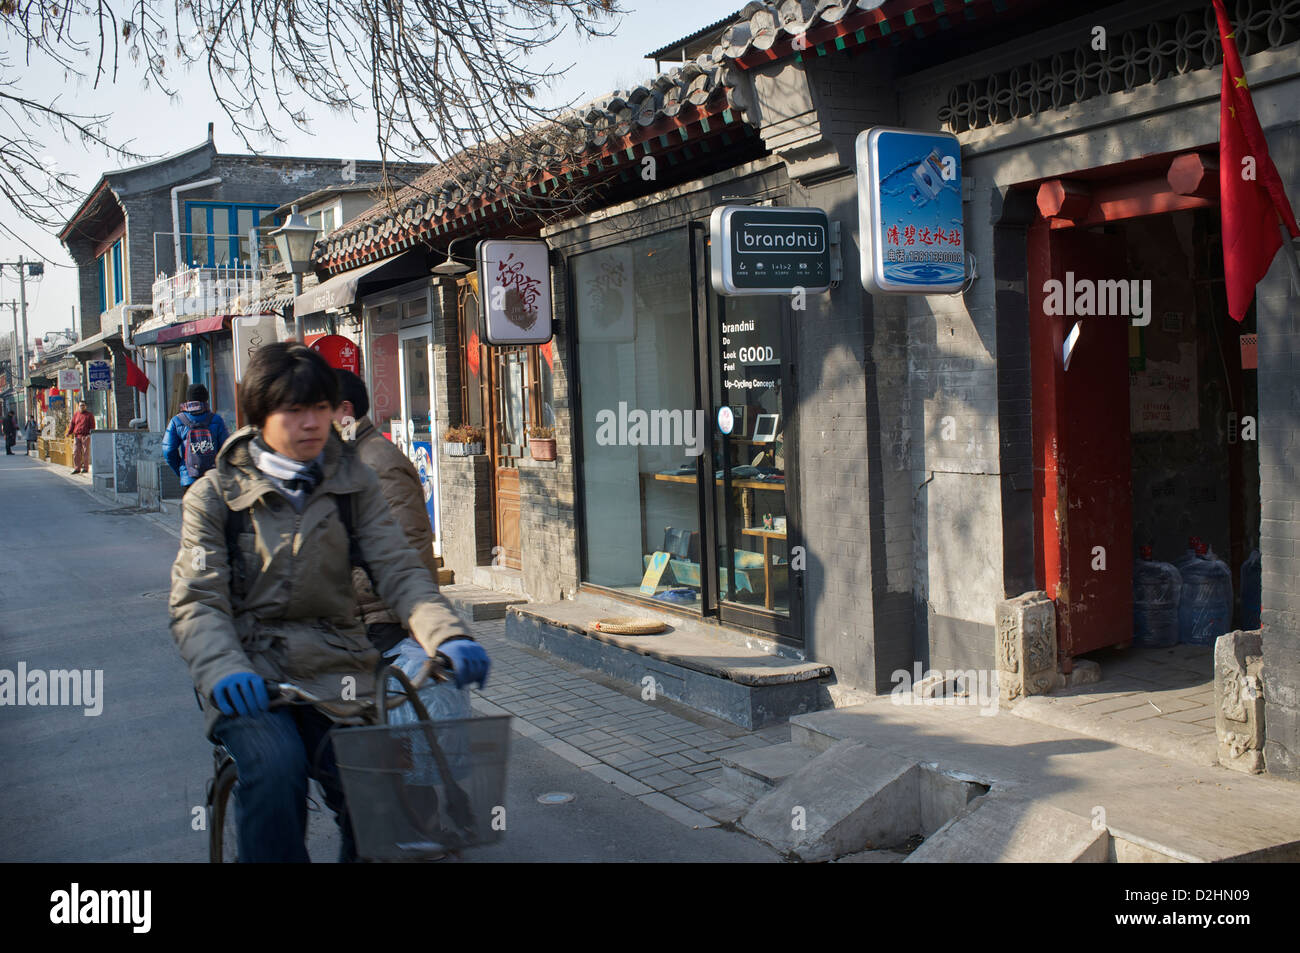 Wudaoying Hutong - some call it the next Nanluoguxiang alley in Beijing, China. 26-Jan-2013 Stock Photo